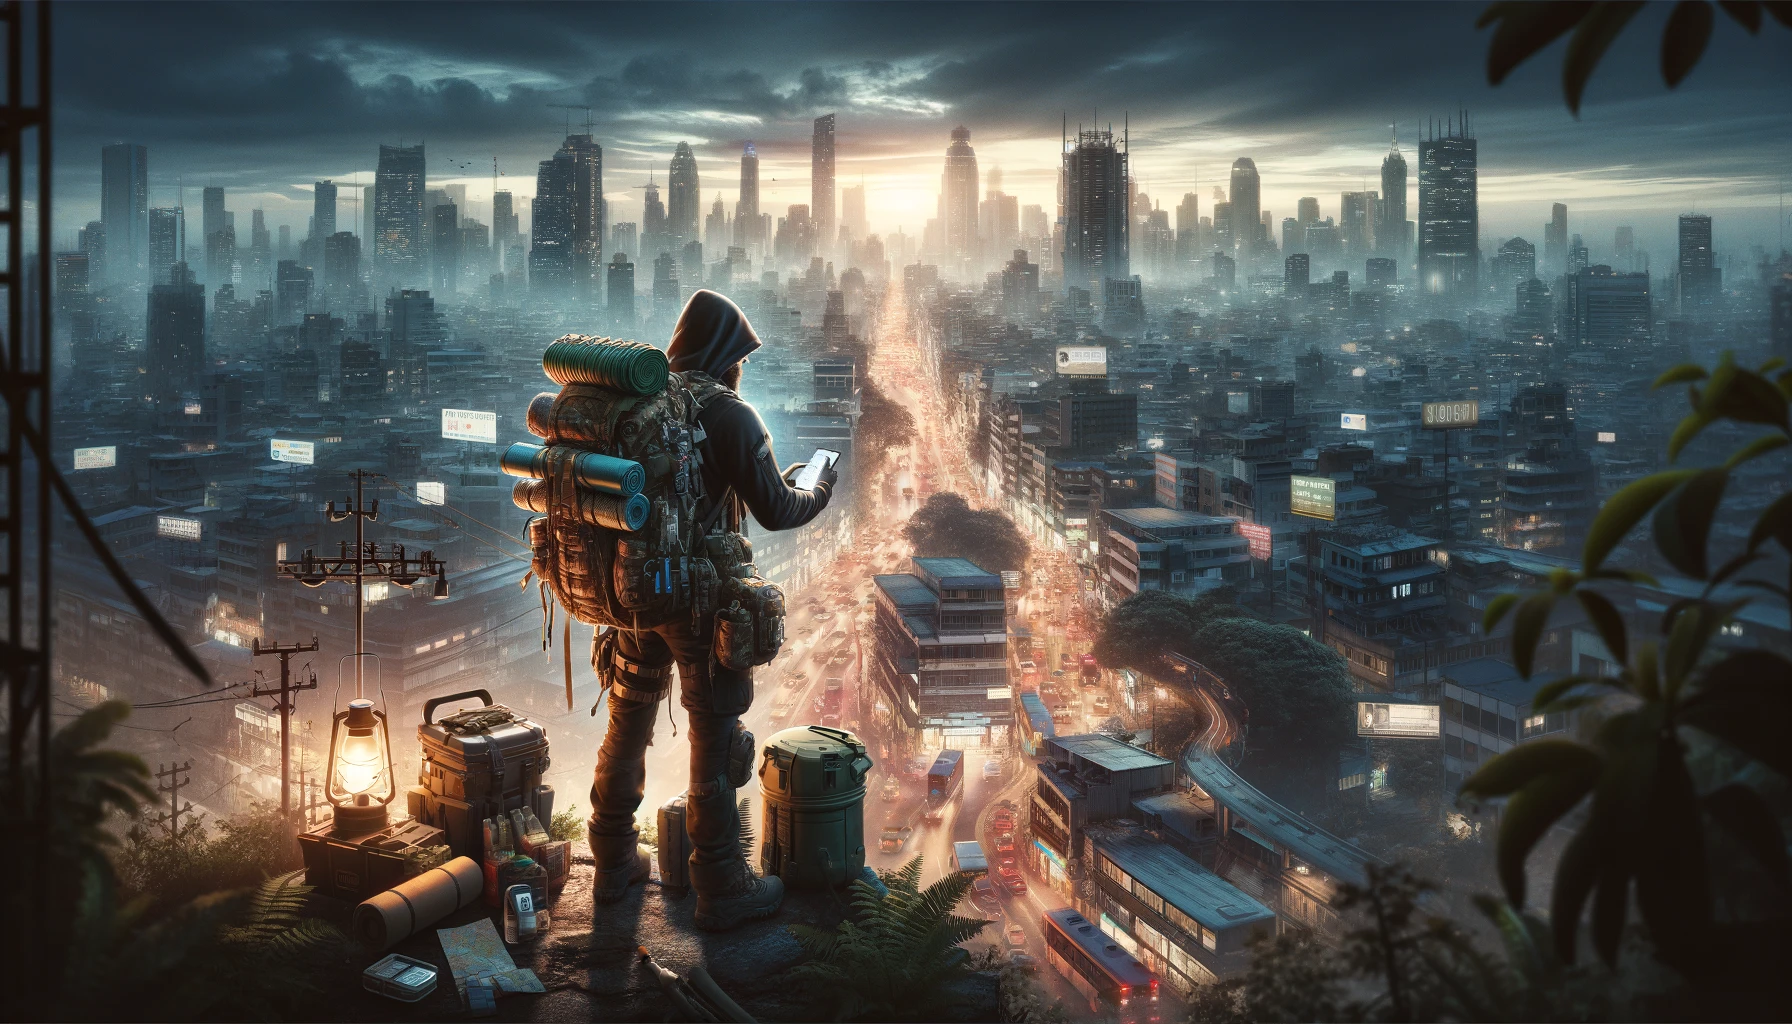 Urban prepper with survival gear navigating a densely populated city at dusk, highlighting adaptability and preparedness in an urban setting